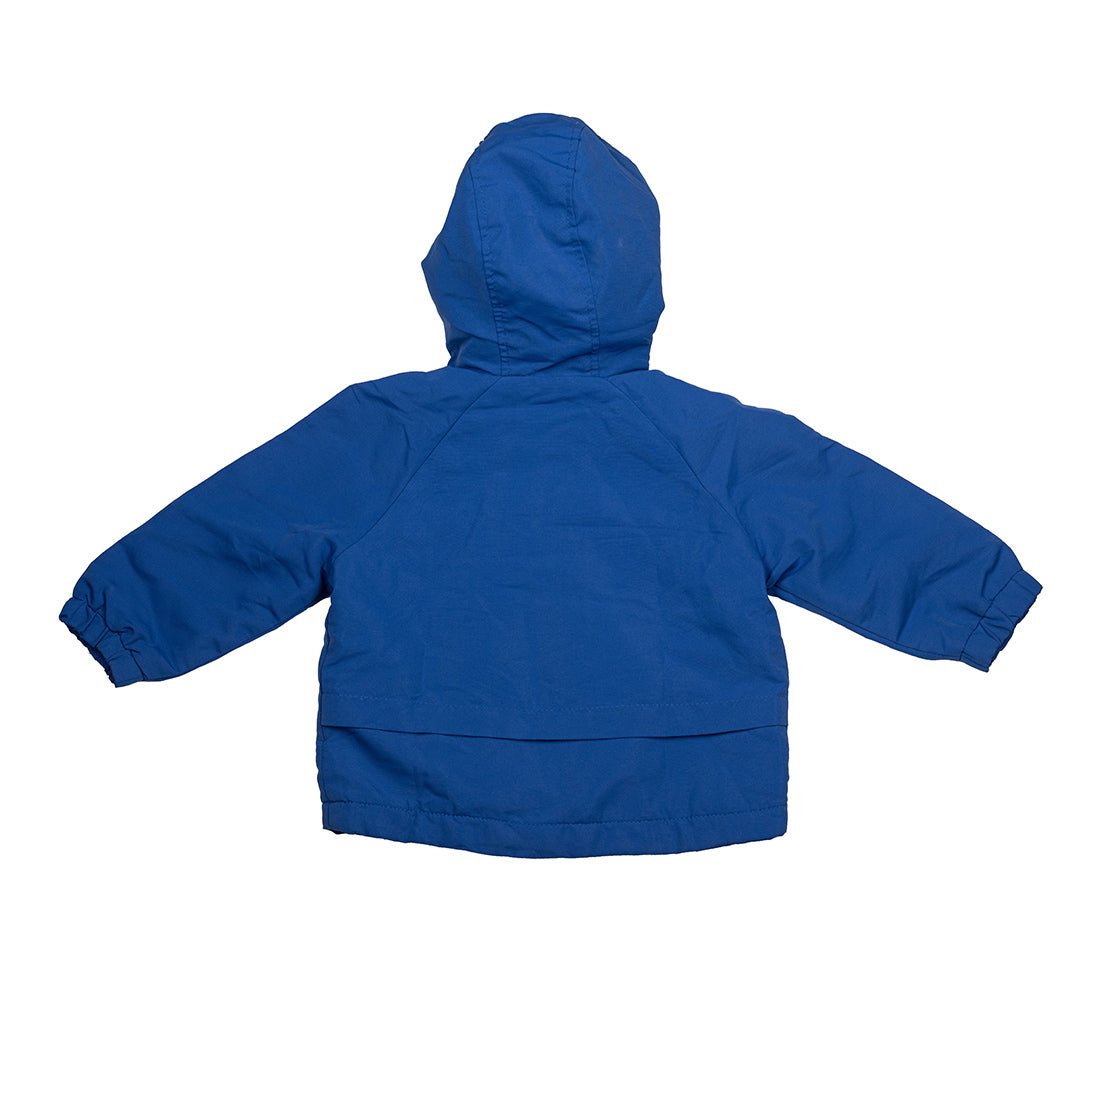 Early Days Jacket For Boys - mymadstore.com